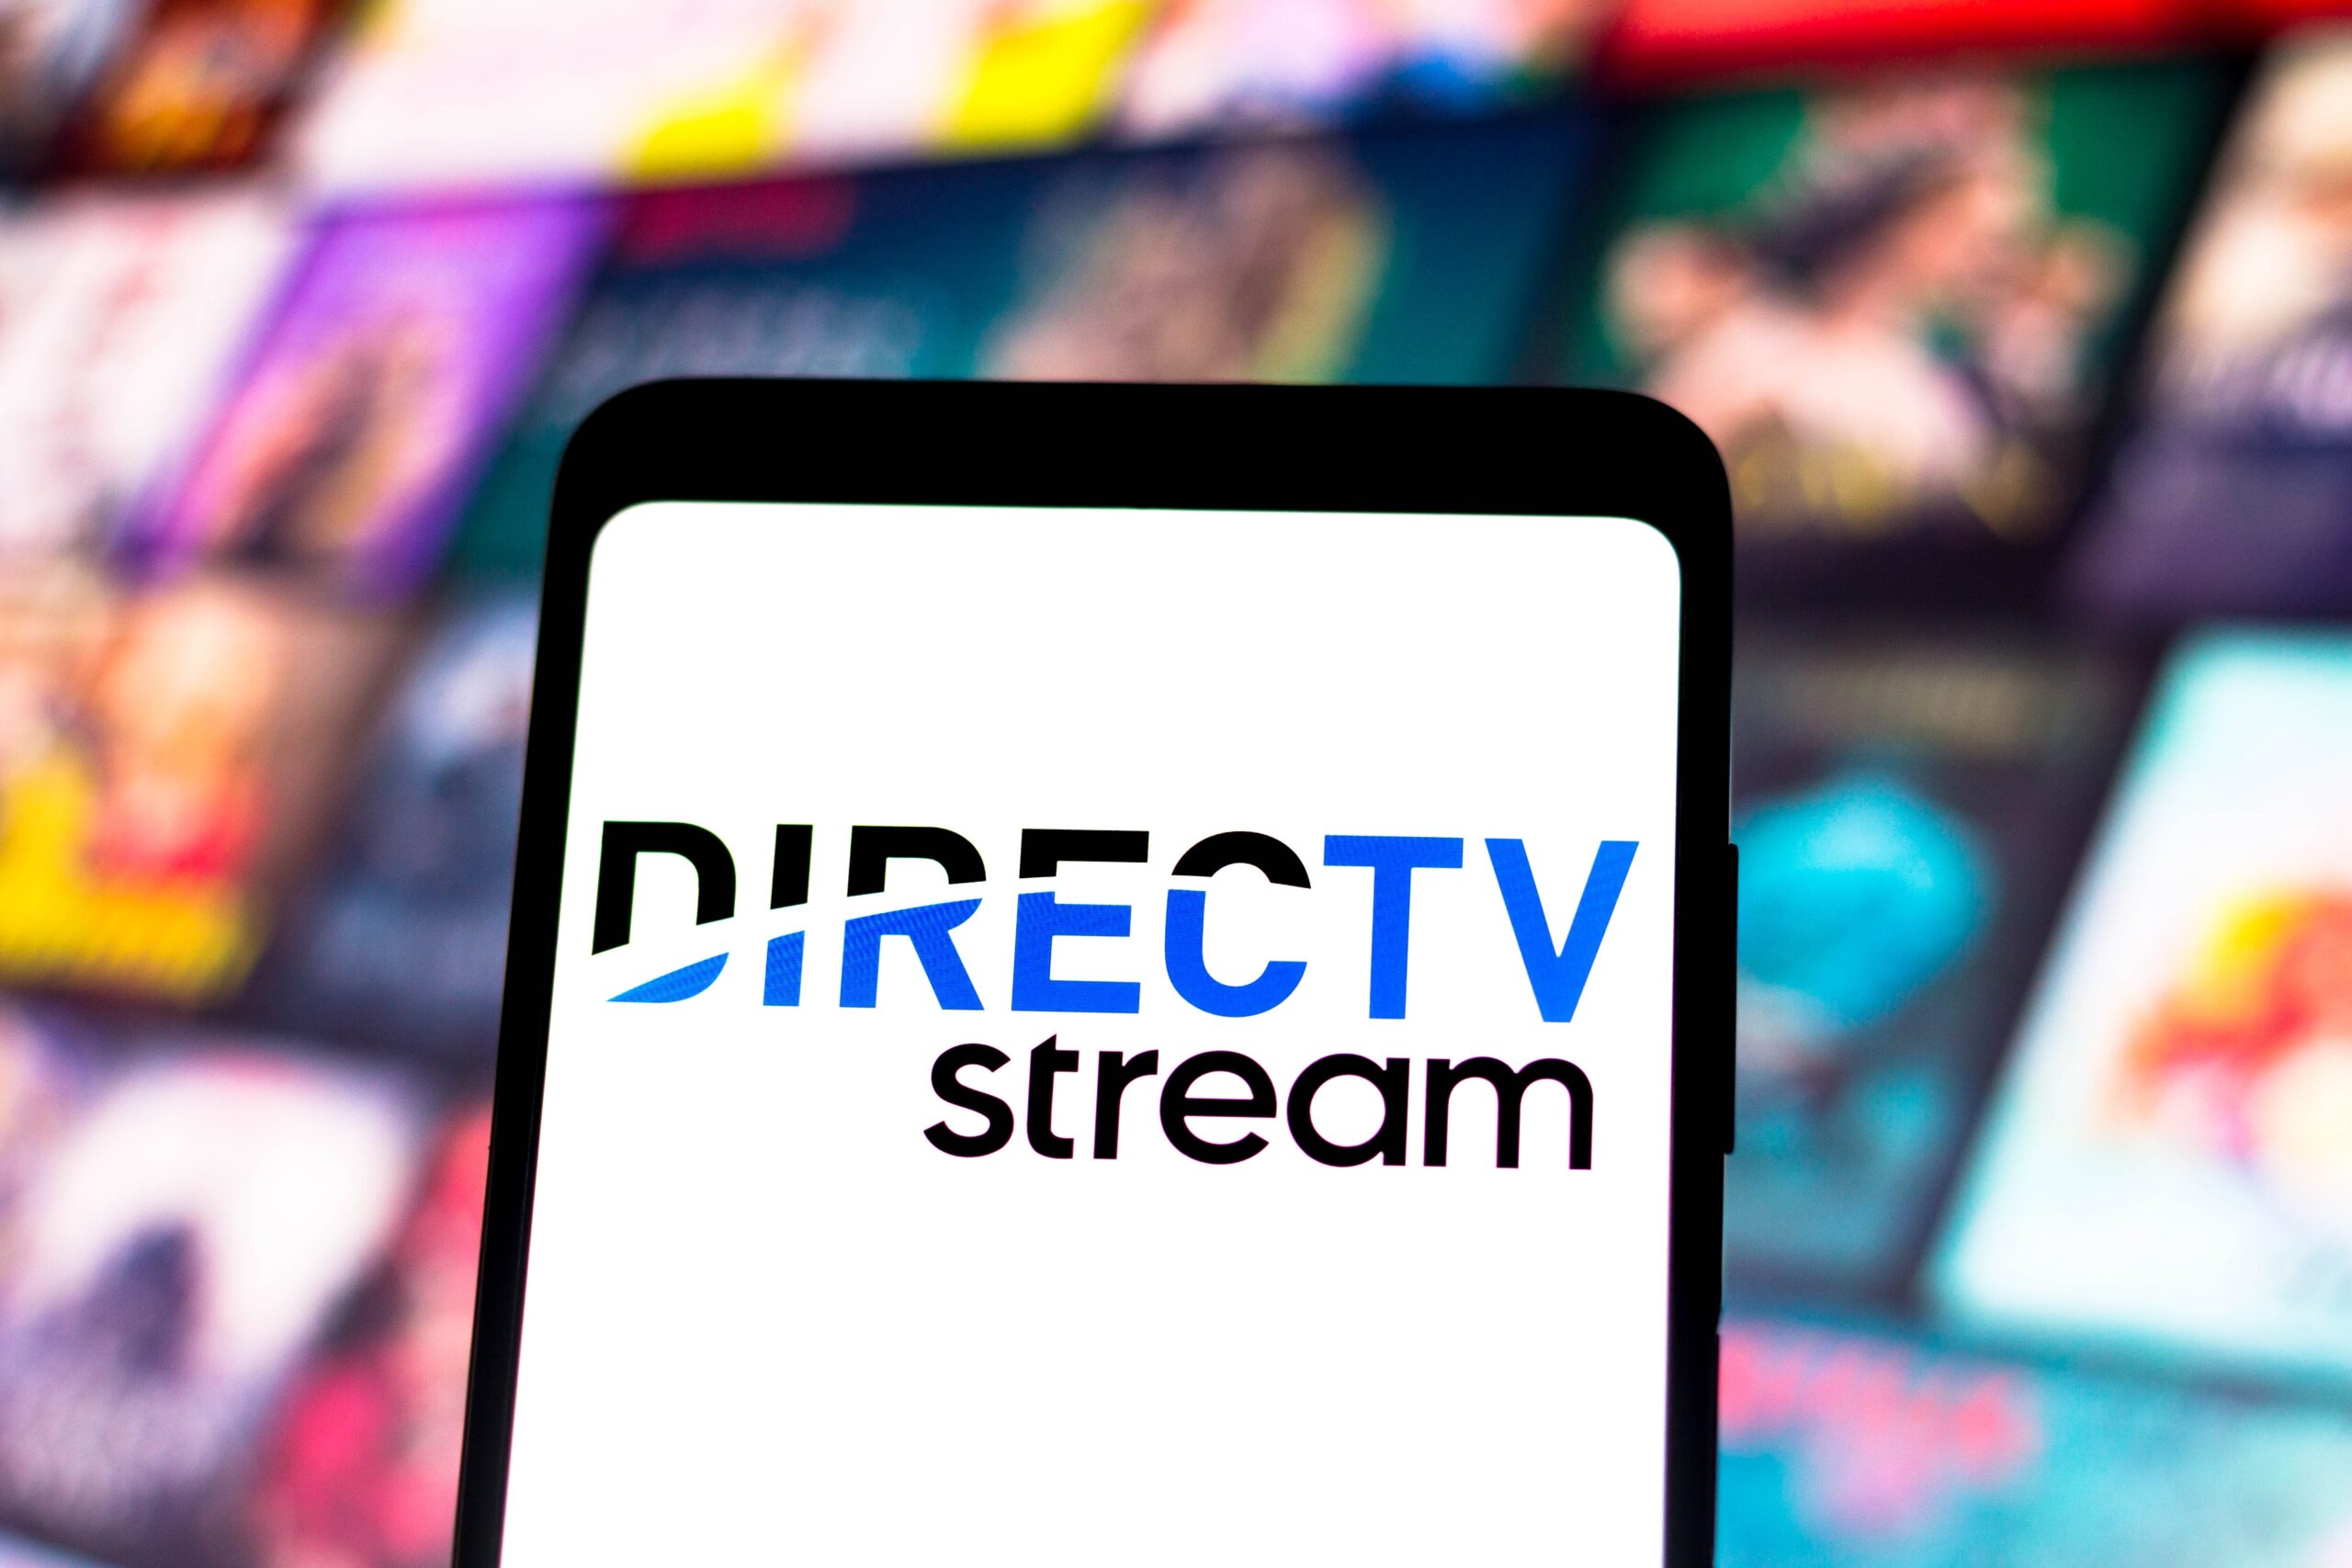 DIRECTV Says it Would Consider Cutting Out Locals to Avoid ‘Driving Business Off a Cliff’